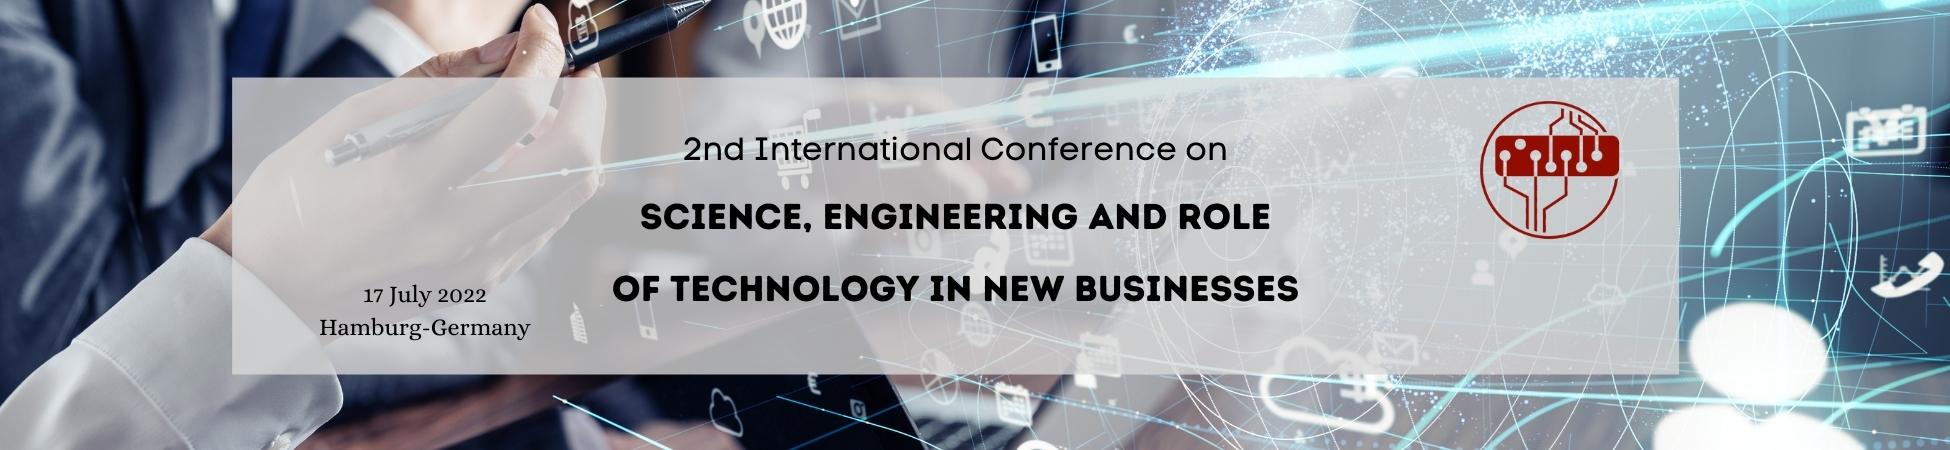 2nd International Conference on Science, Engineering and Role of Technology in new Businesses